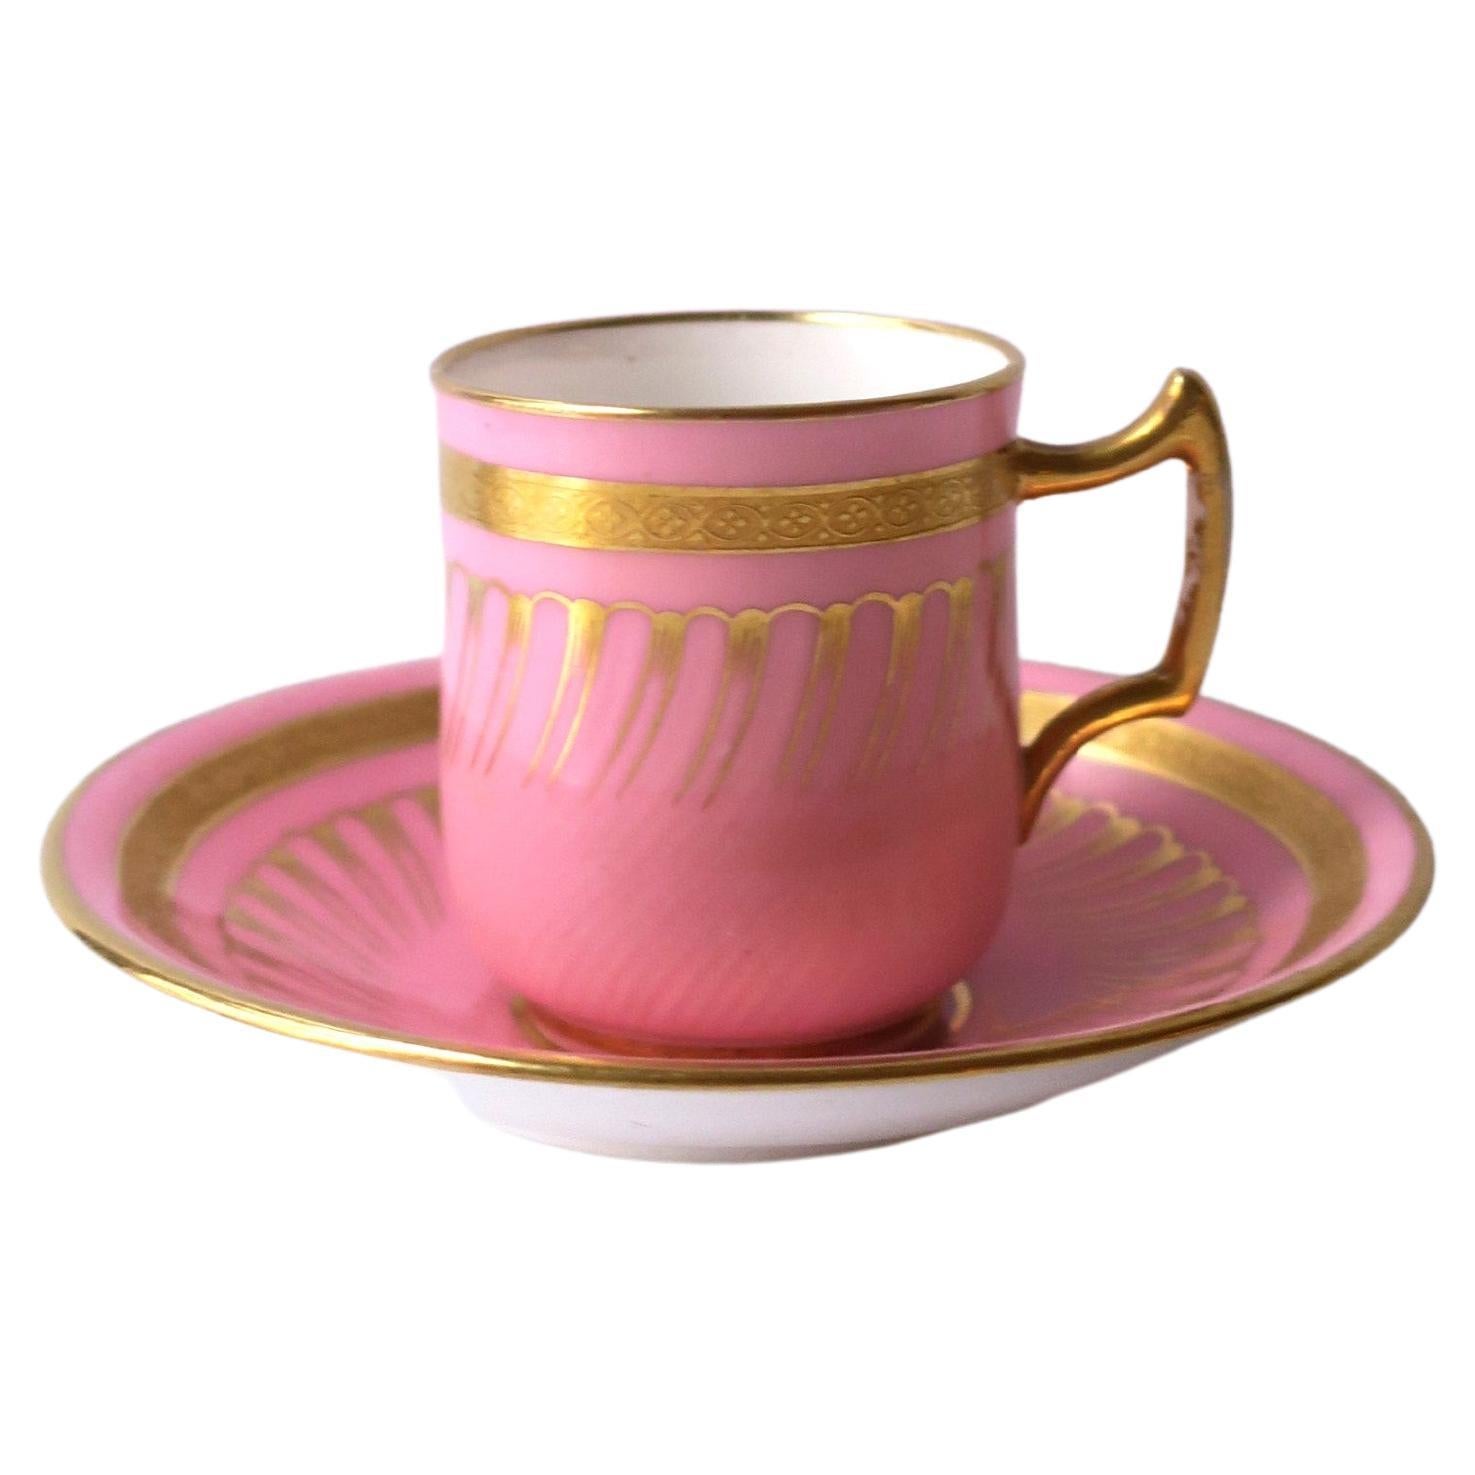 English Minton Pink & Gold Porcelain Coffee Espresso Cup & Saucer, 19th century For Sale